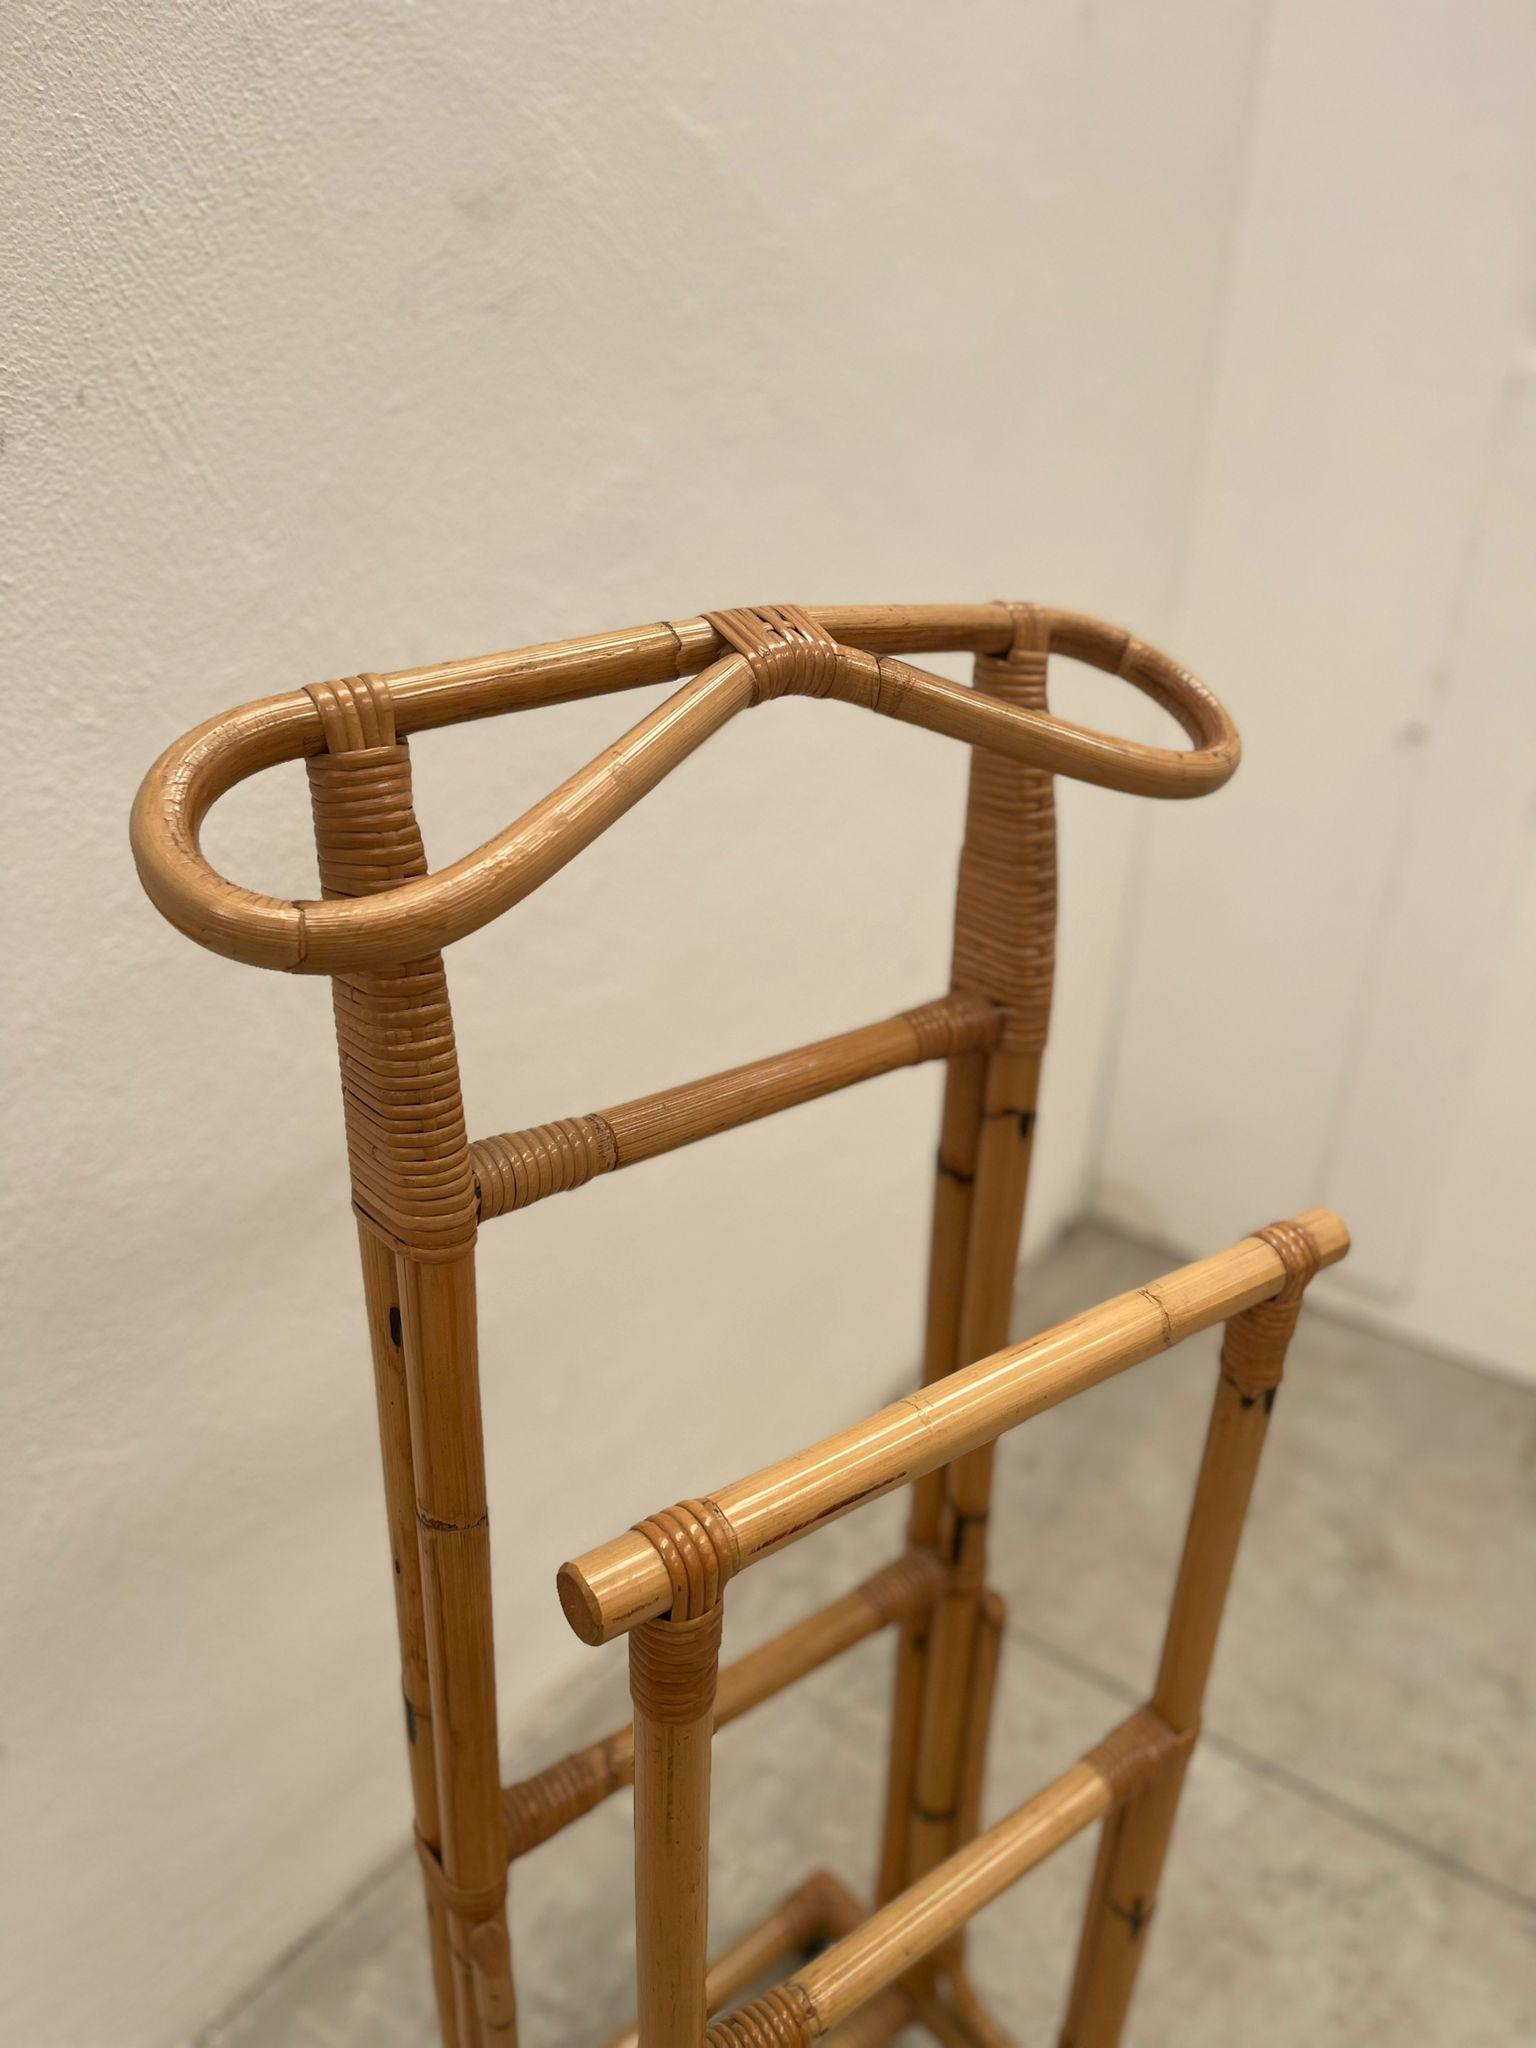 Made of bamboo, it is a Classic piece, ideal for Minimalist lovers. Easily movable thanks to the wheels.

Private collection Di Domenico Rugiano